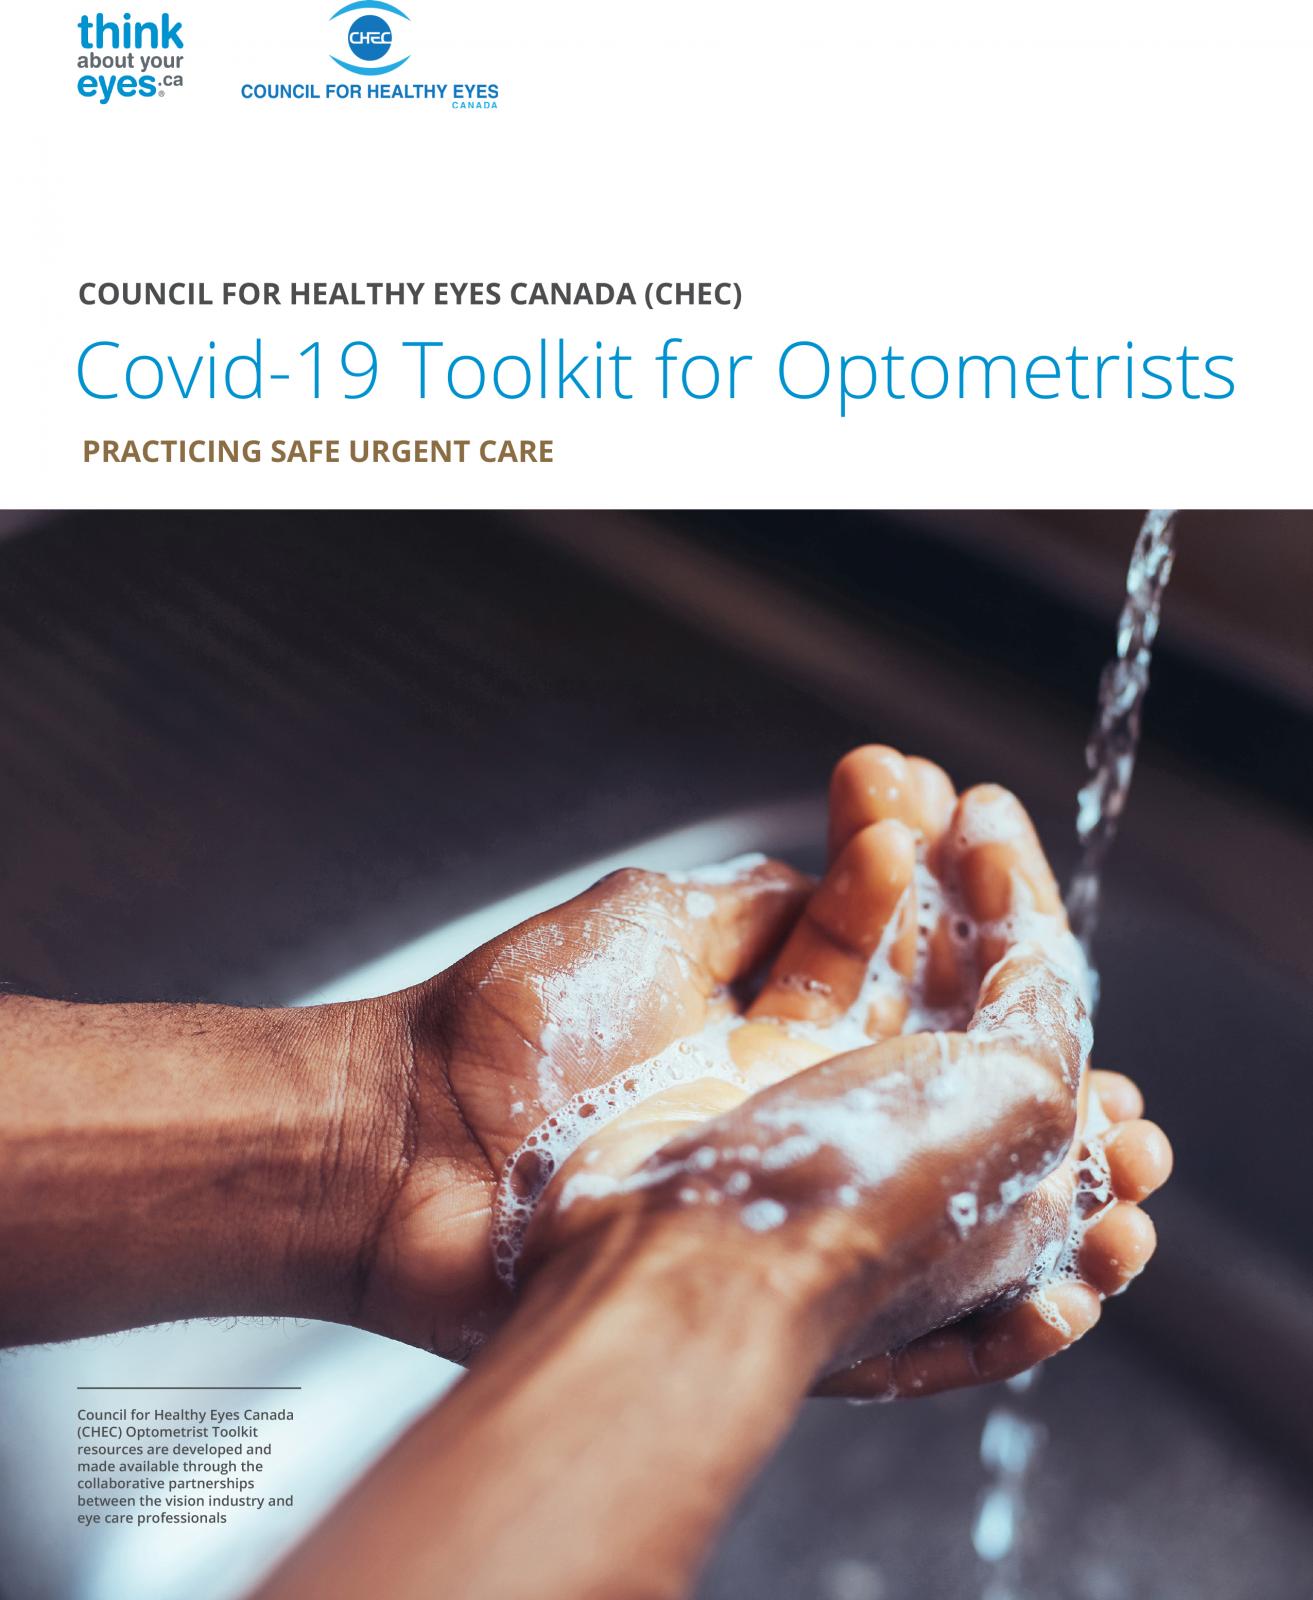 Covid-19 Toolkit for Optometrists - PRACTICING SAFE URGENT CARE